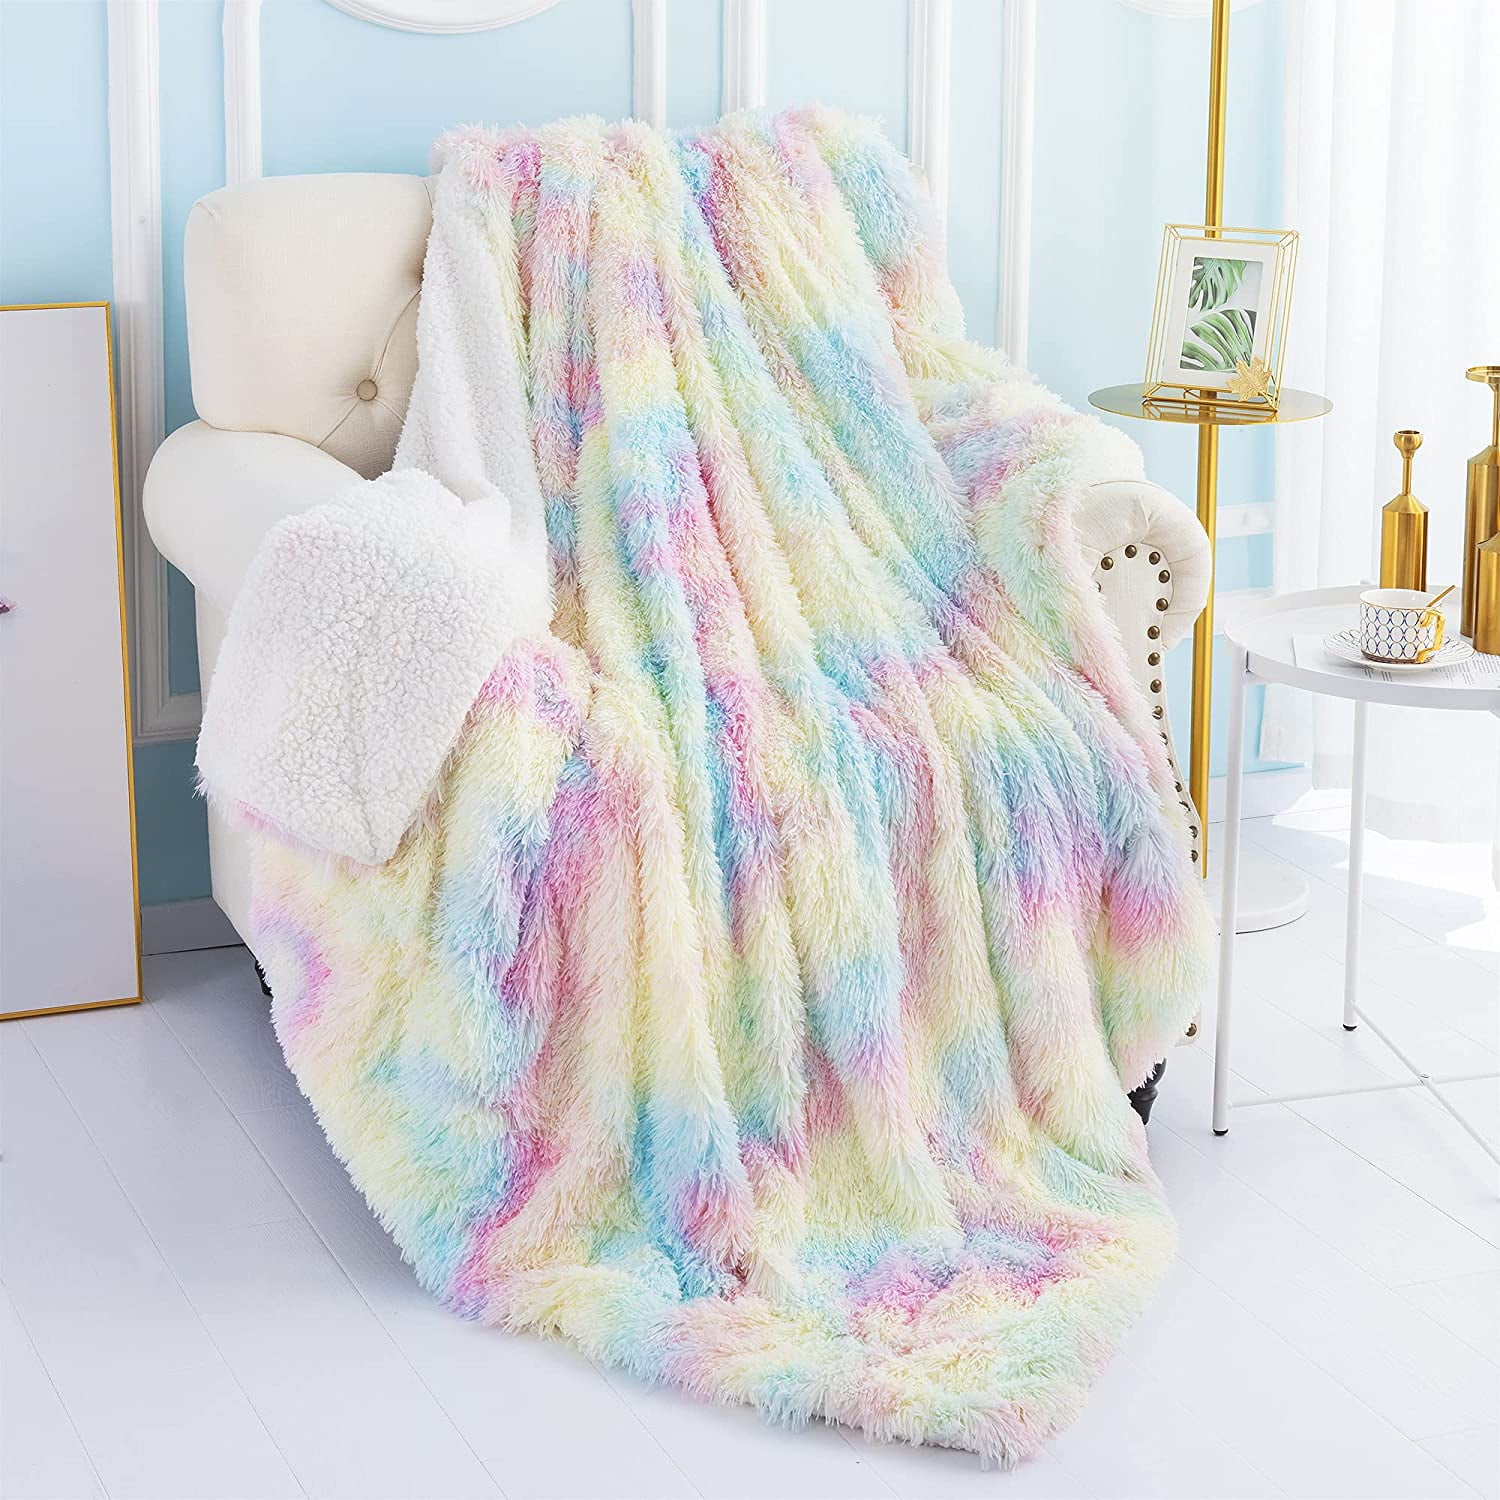 Rainbow Background Round Throw Blanket Ultra-Soft Throws for Bedding Couch Sofa Office Diameter 60 inches 